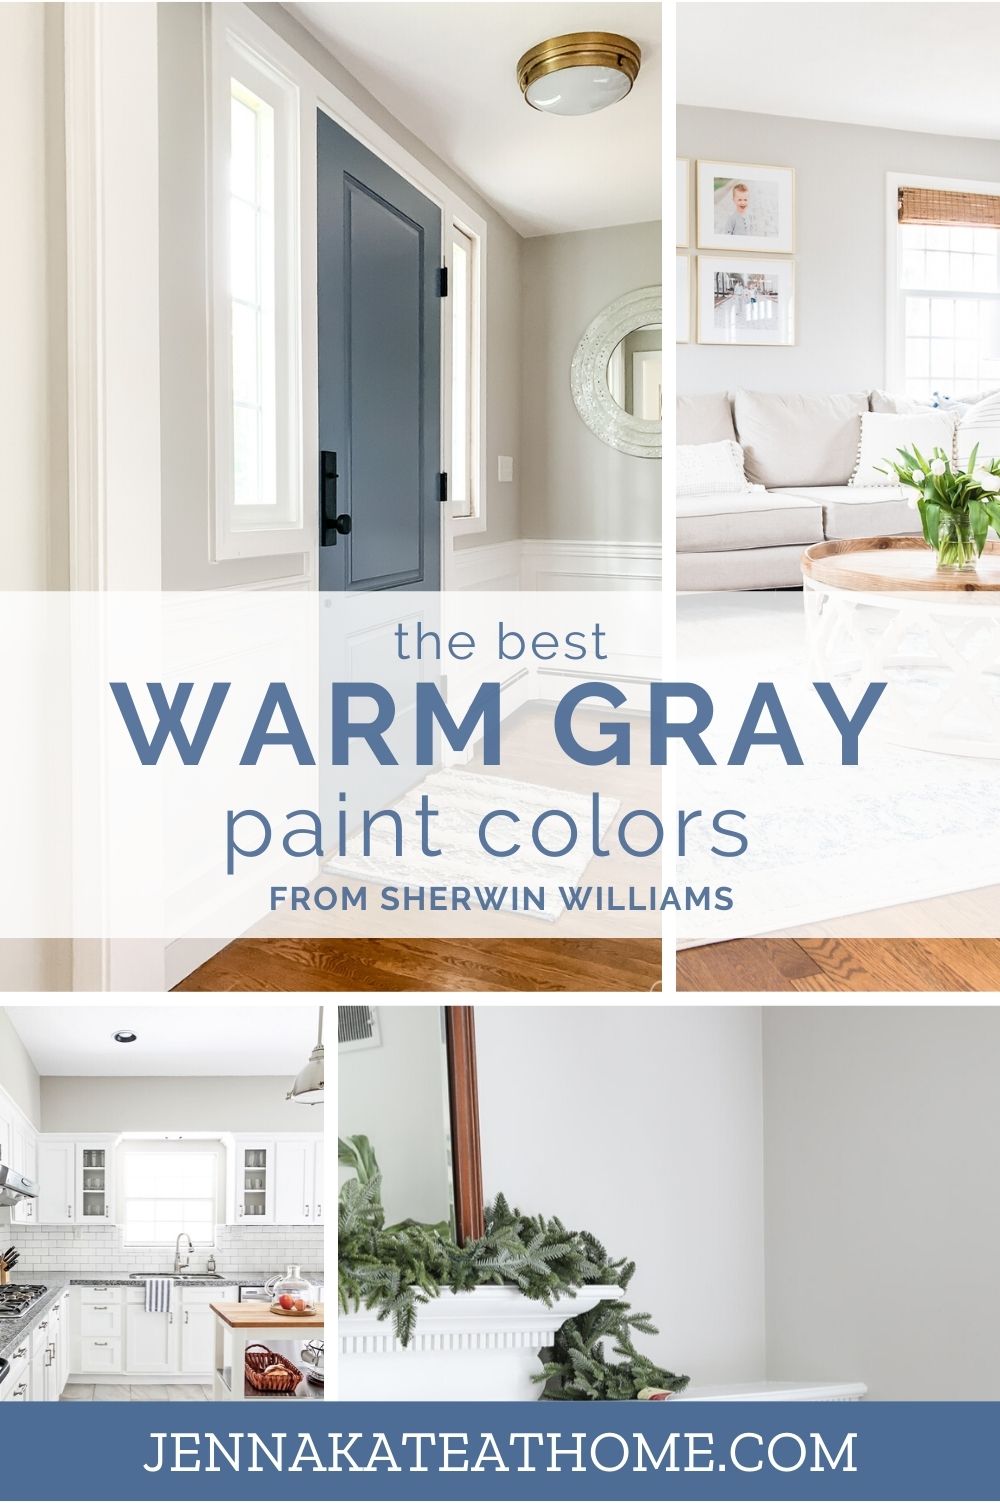 The best warm gray paint colors from Sherwin Williams that will give you that fresh, modern look without making your room feel cold.